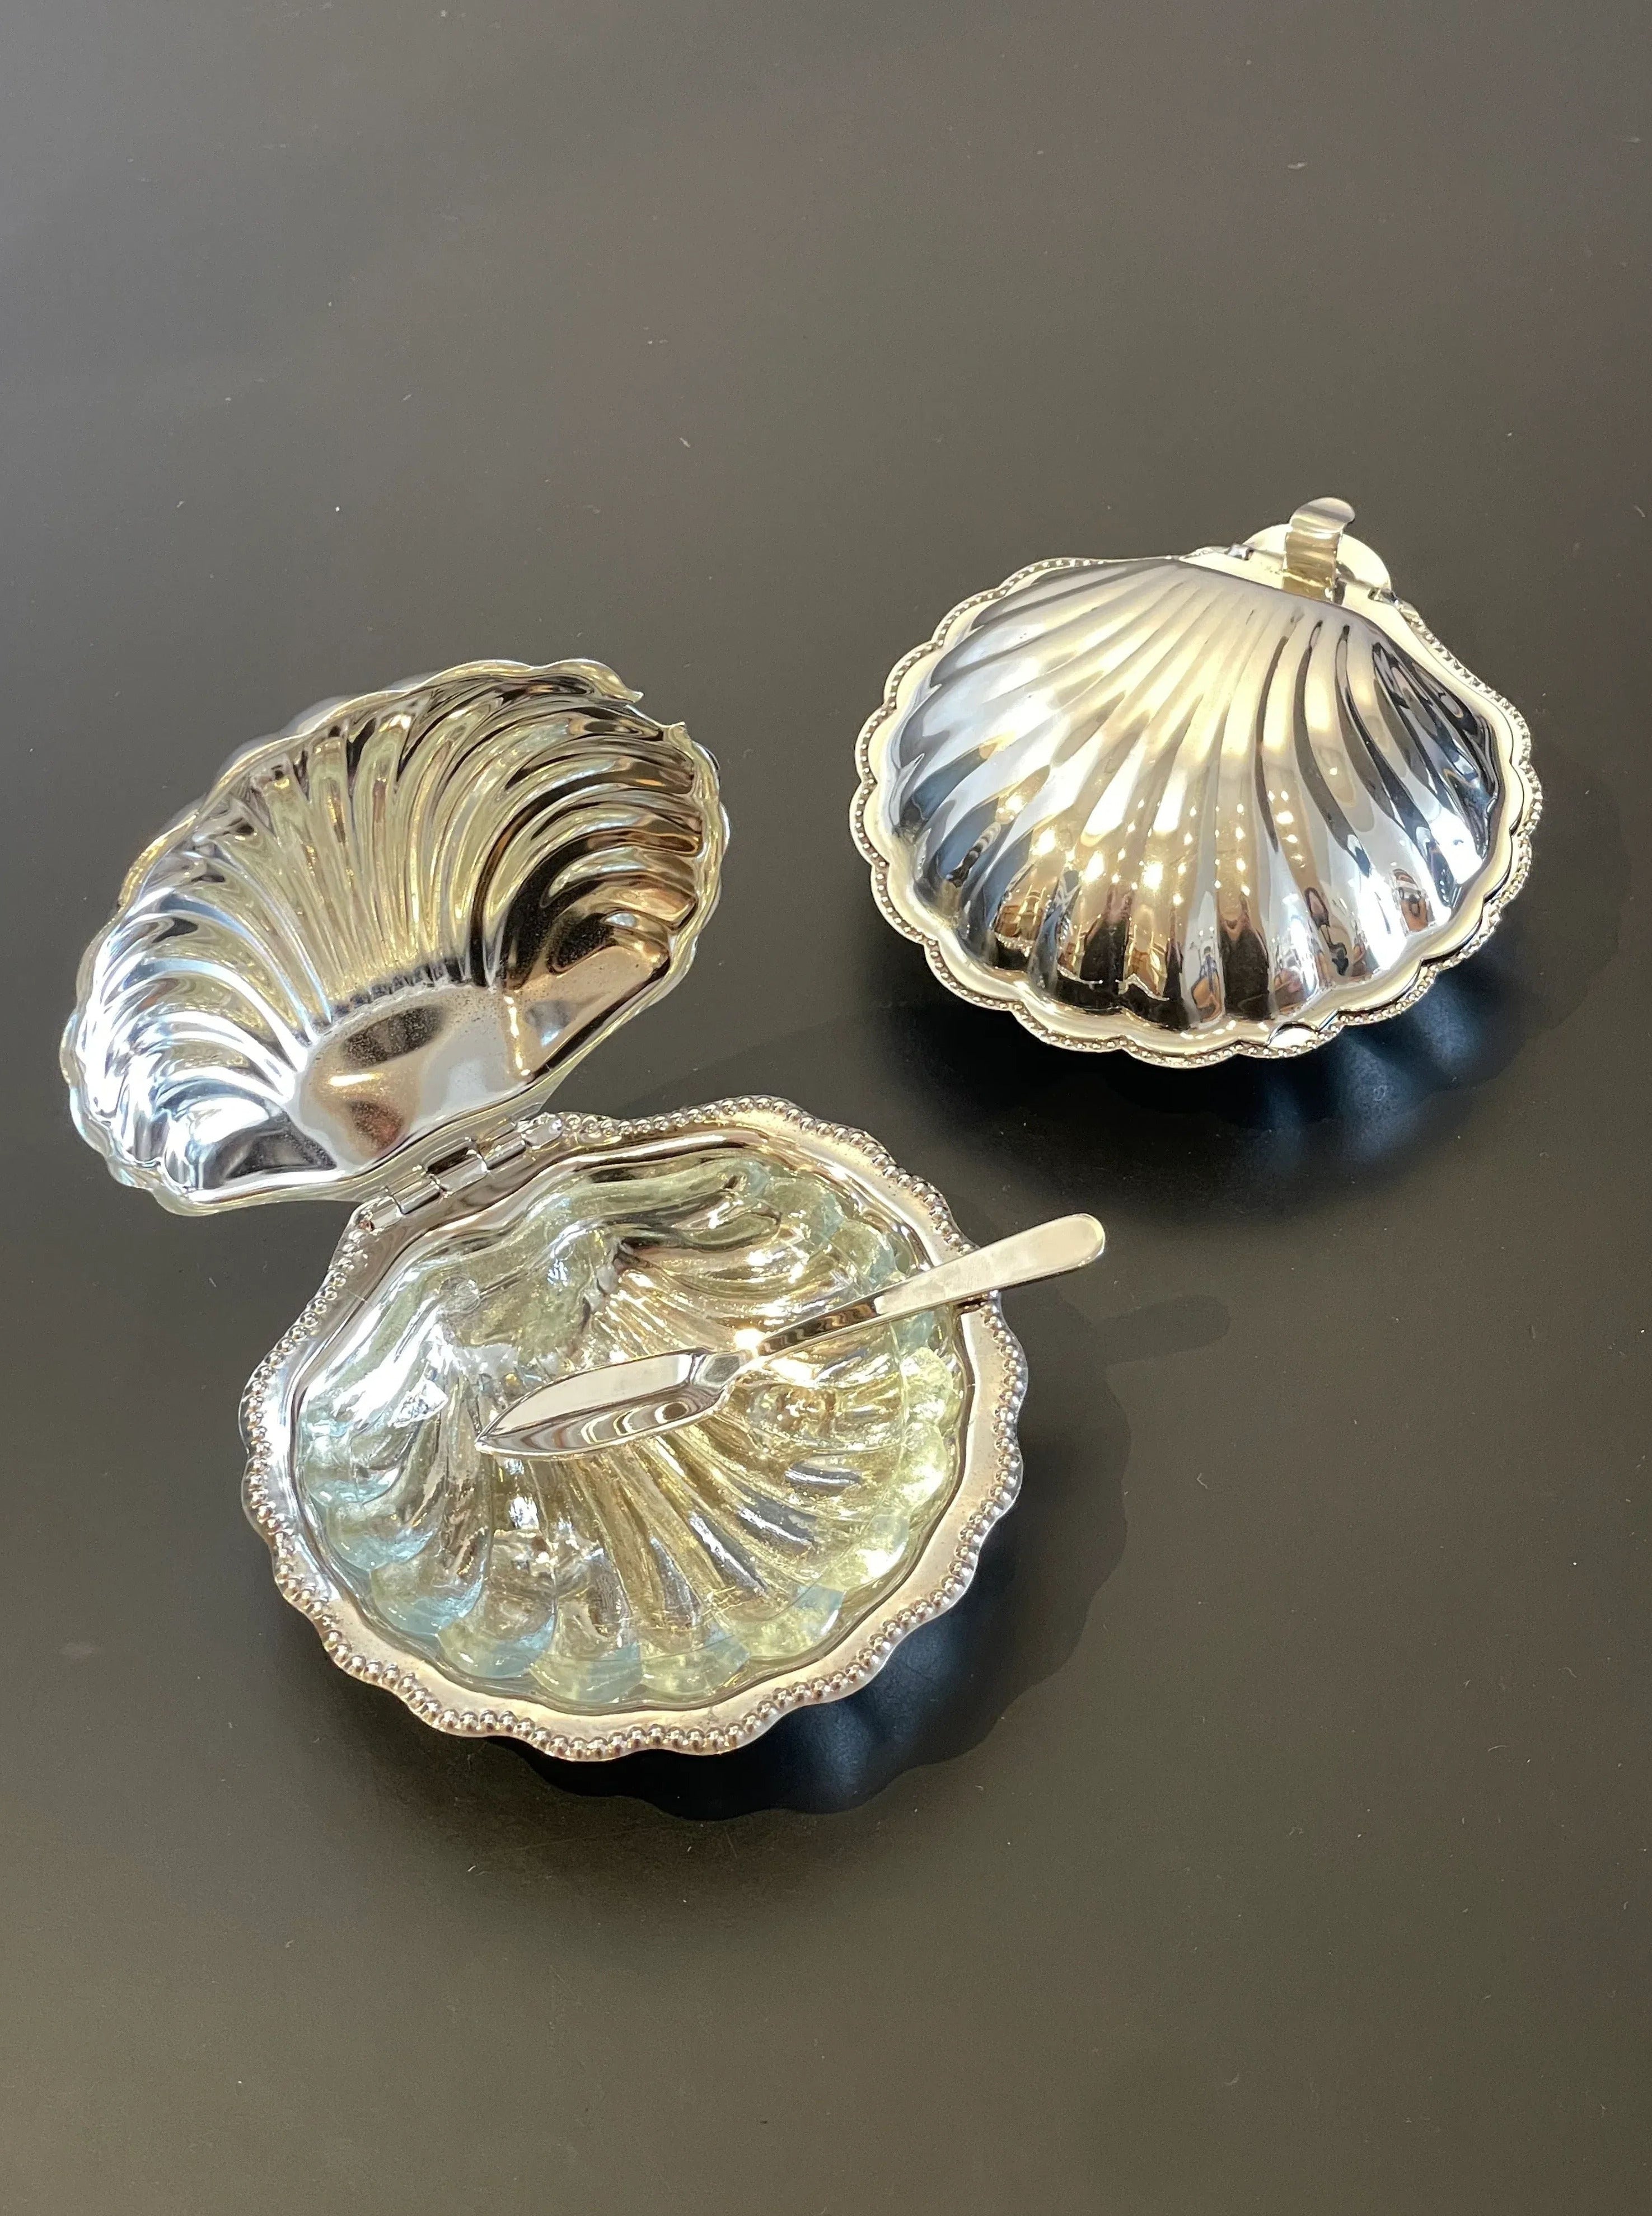  Elegant butter serving dish with silver plating and unique shell shape